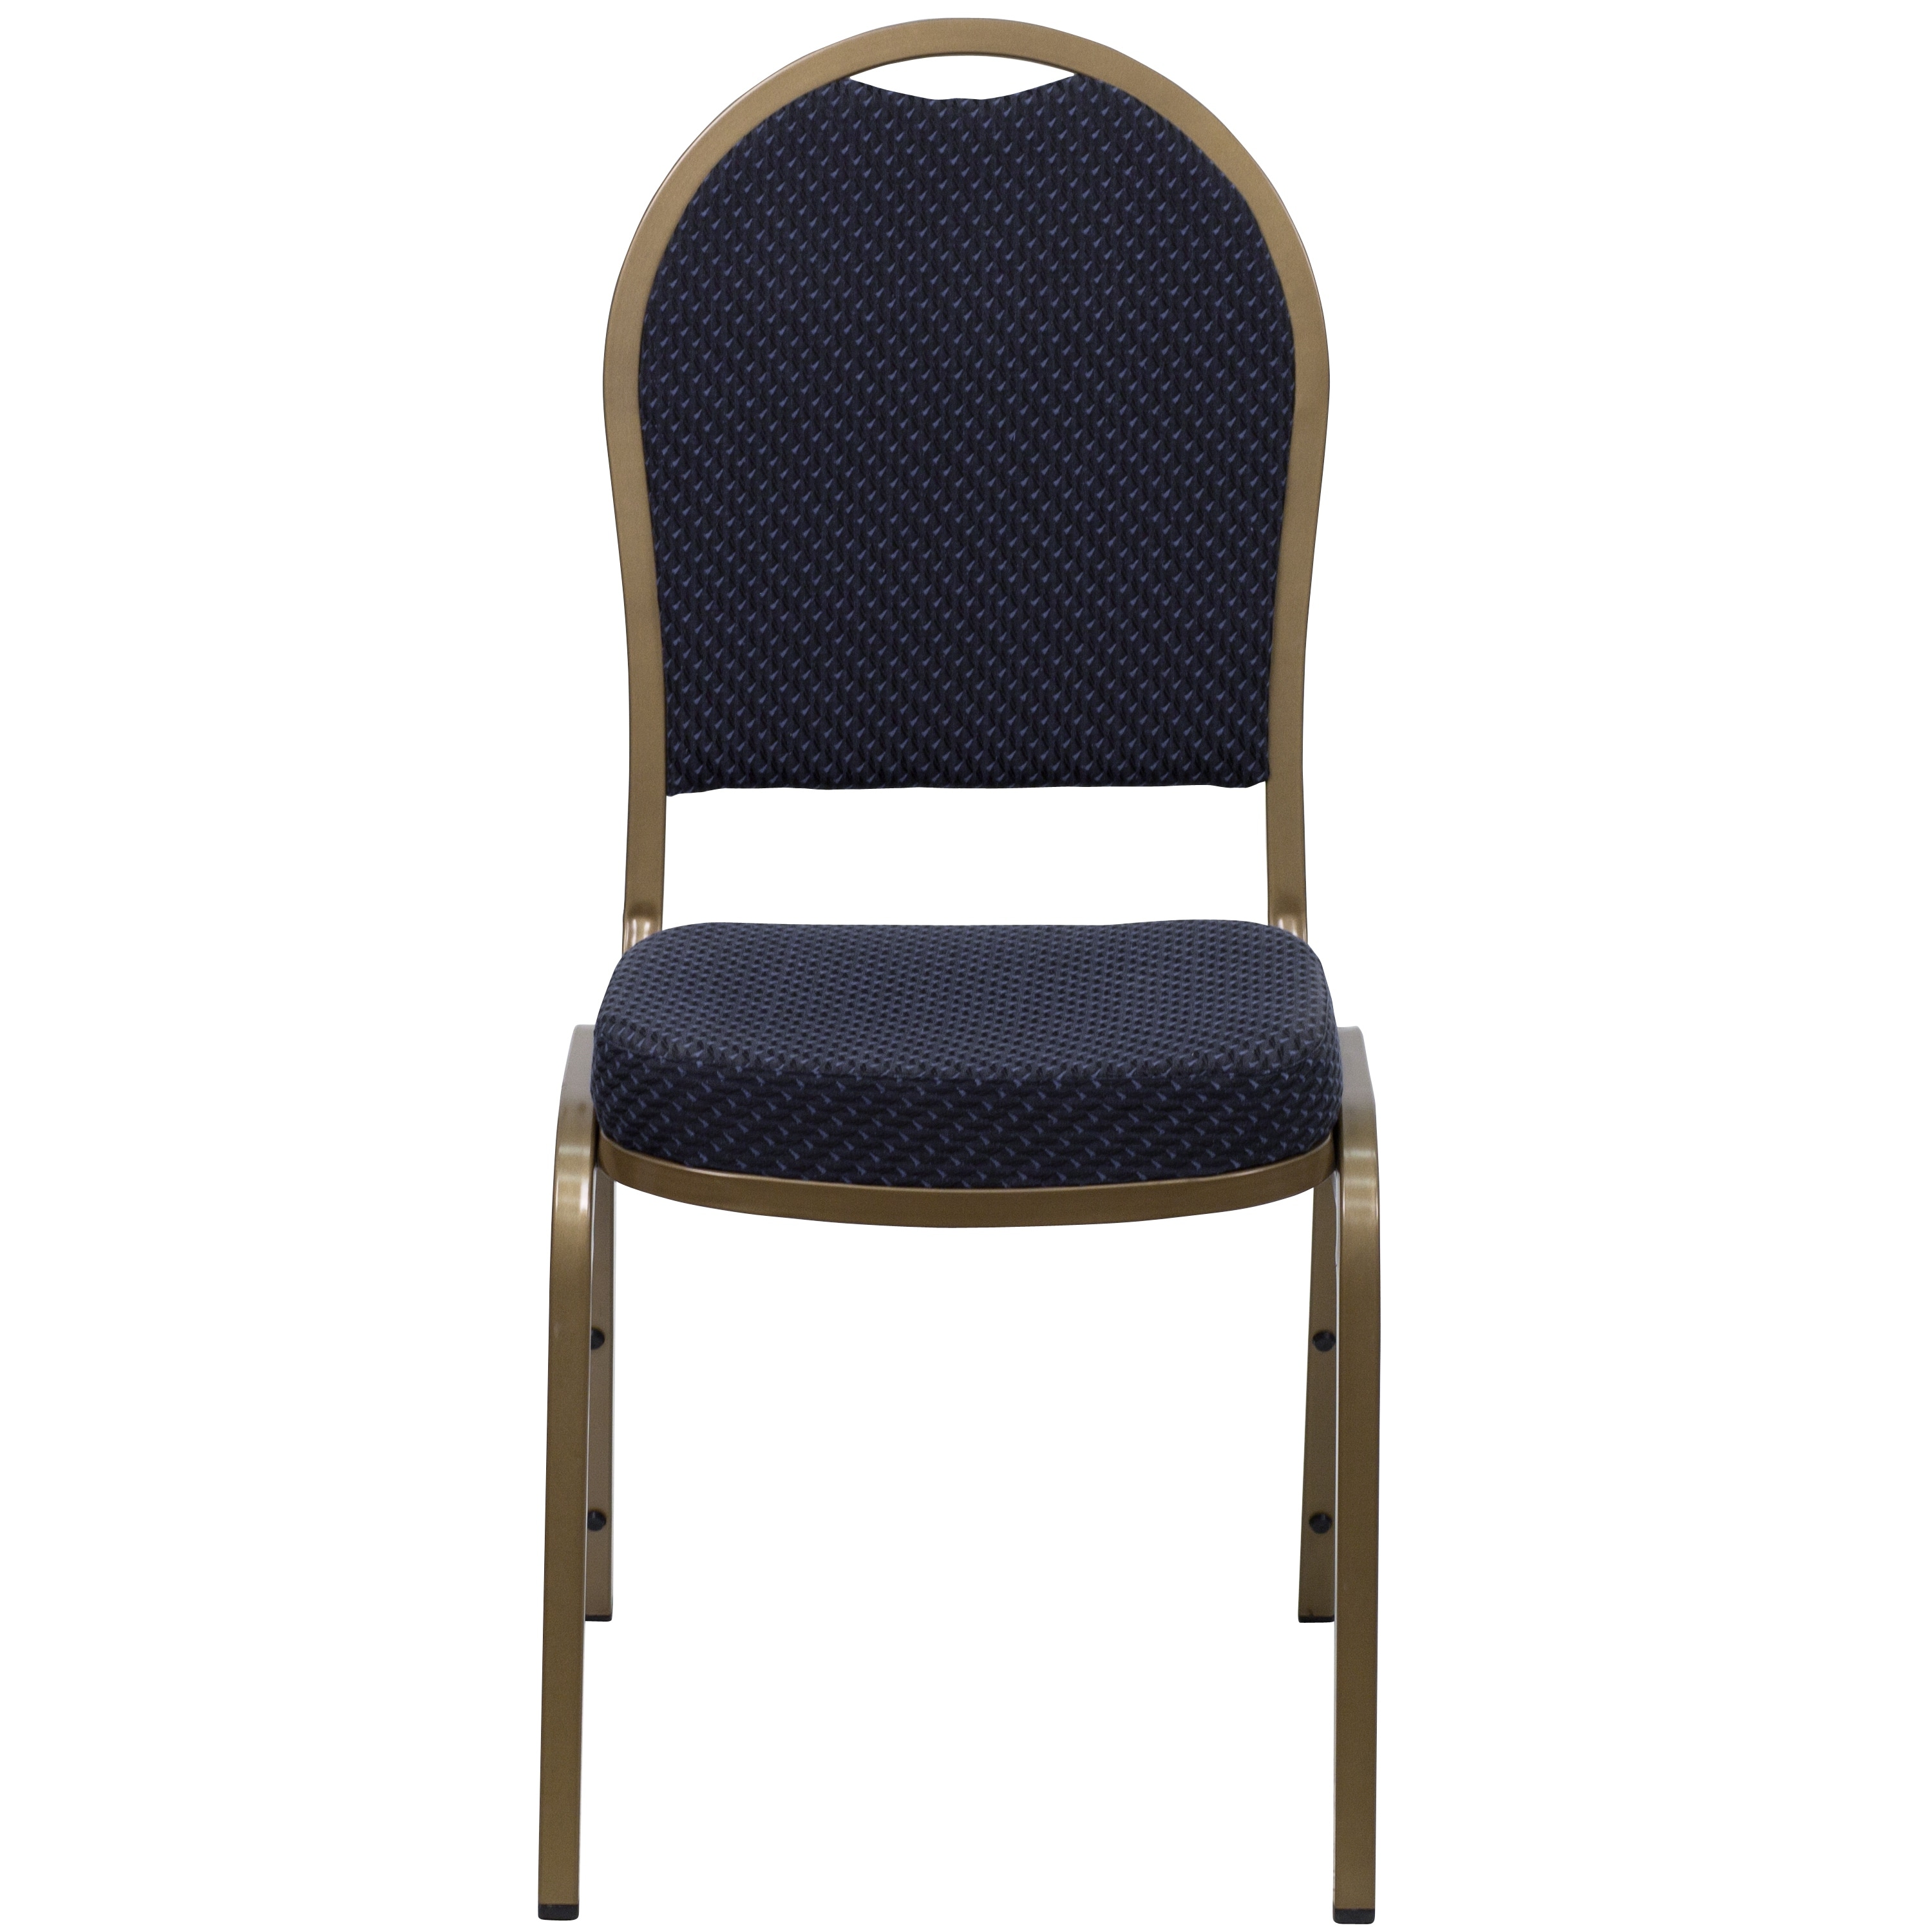 https://ak1.ostkcdn.com/images/products/is/images/direct/fa80ef27d9552f362e9dd00a7597408b8cfe63cd/Dome-Back-Stacking-Banquet-Chair.jpg